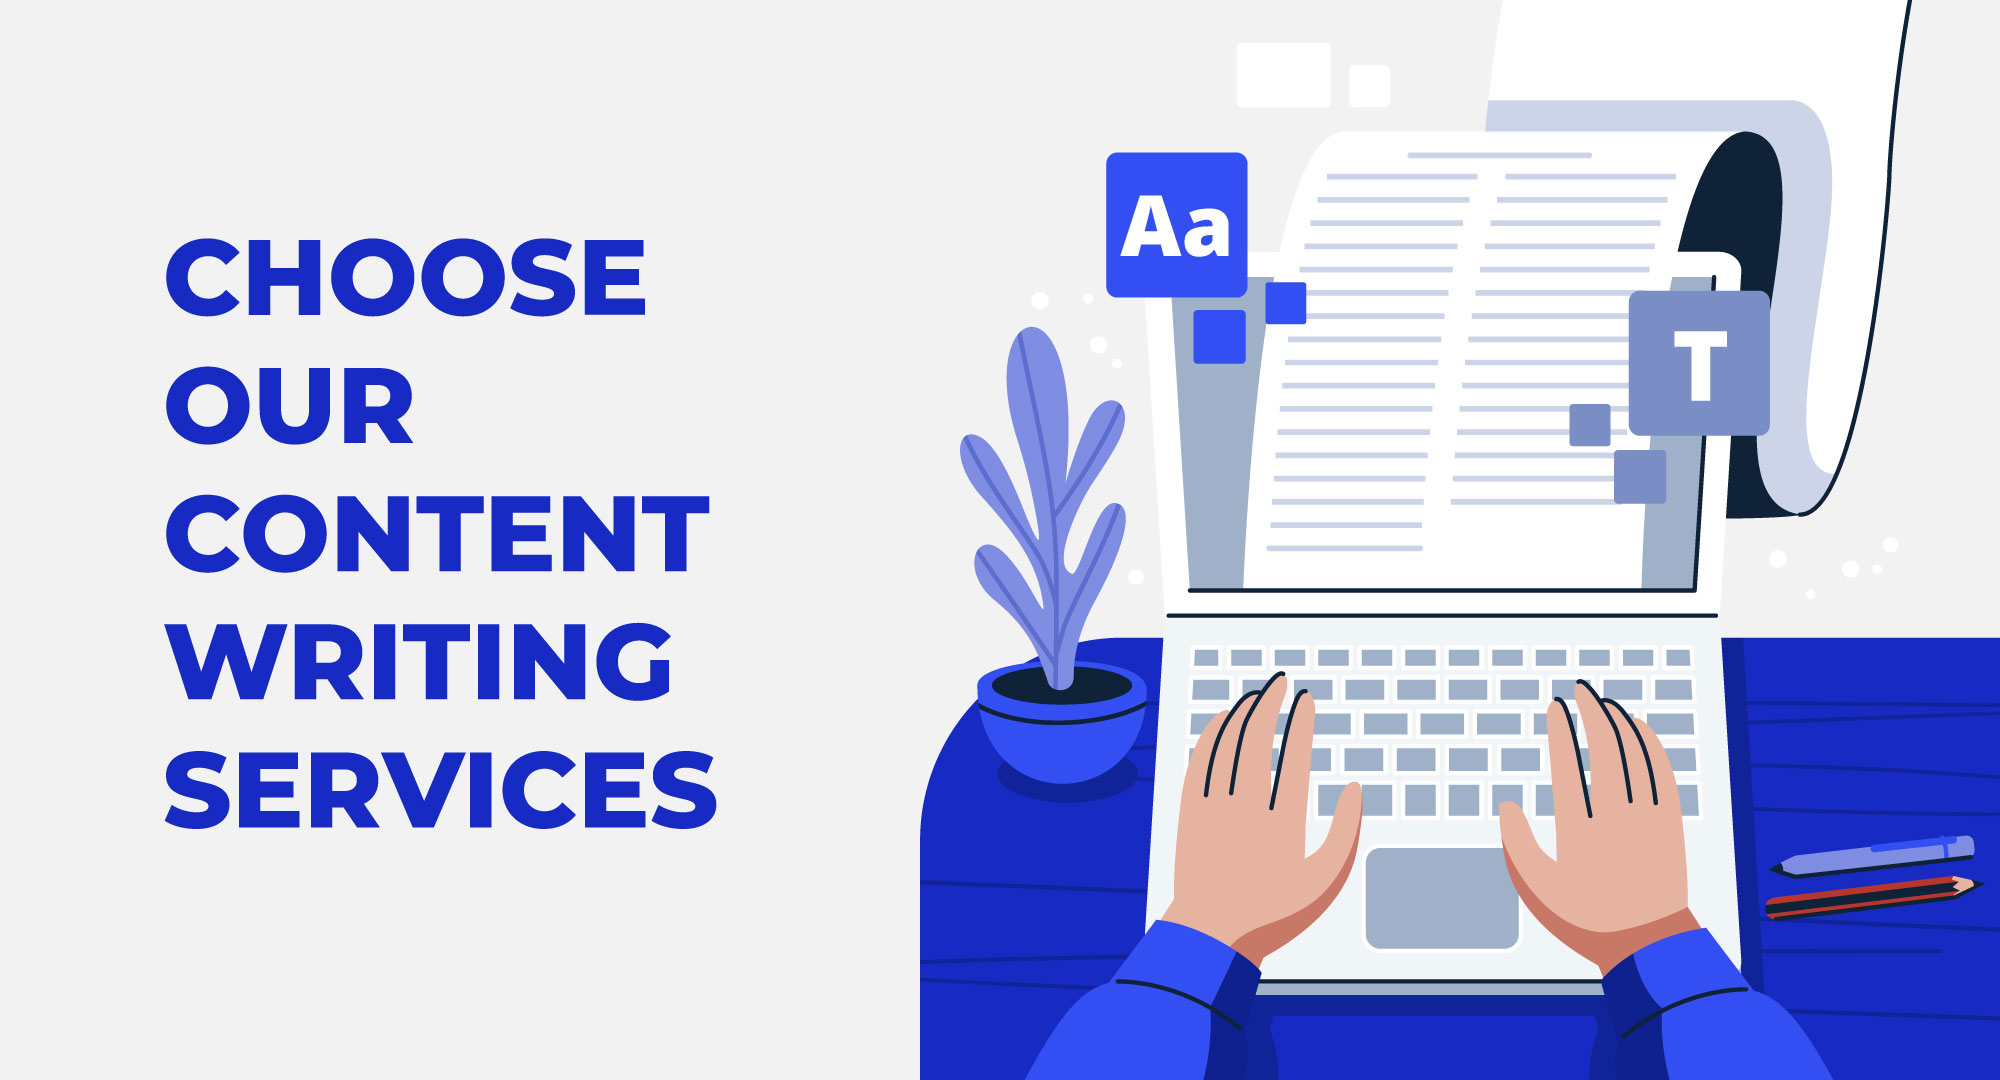 Why Choose Our Content Writing Services?